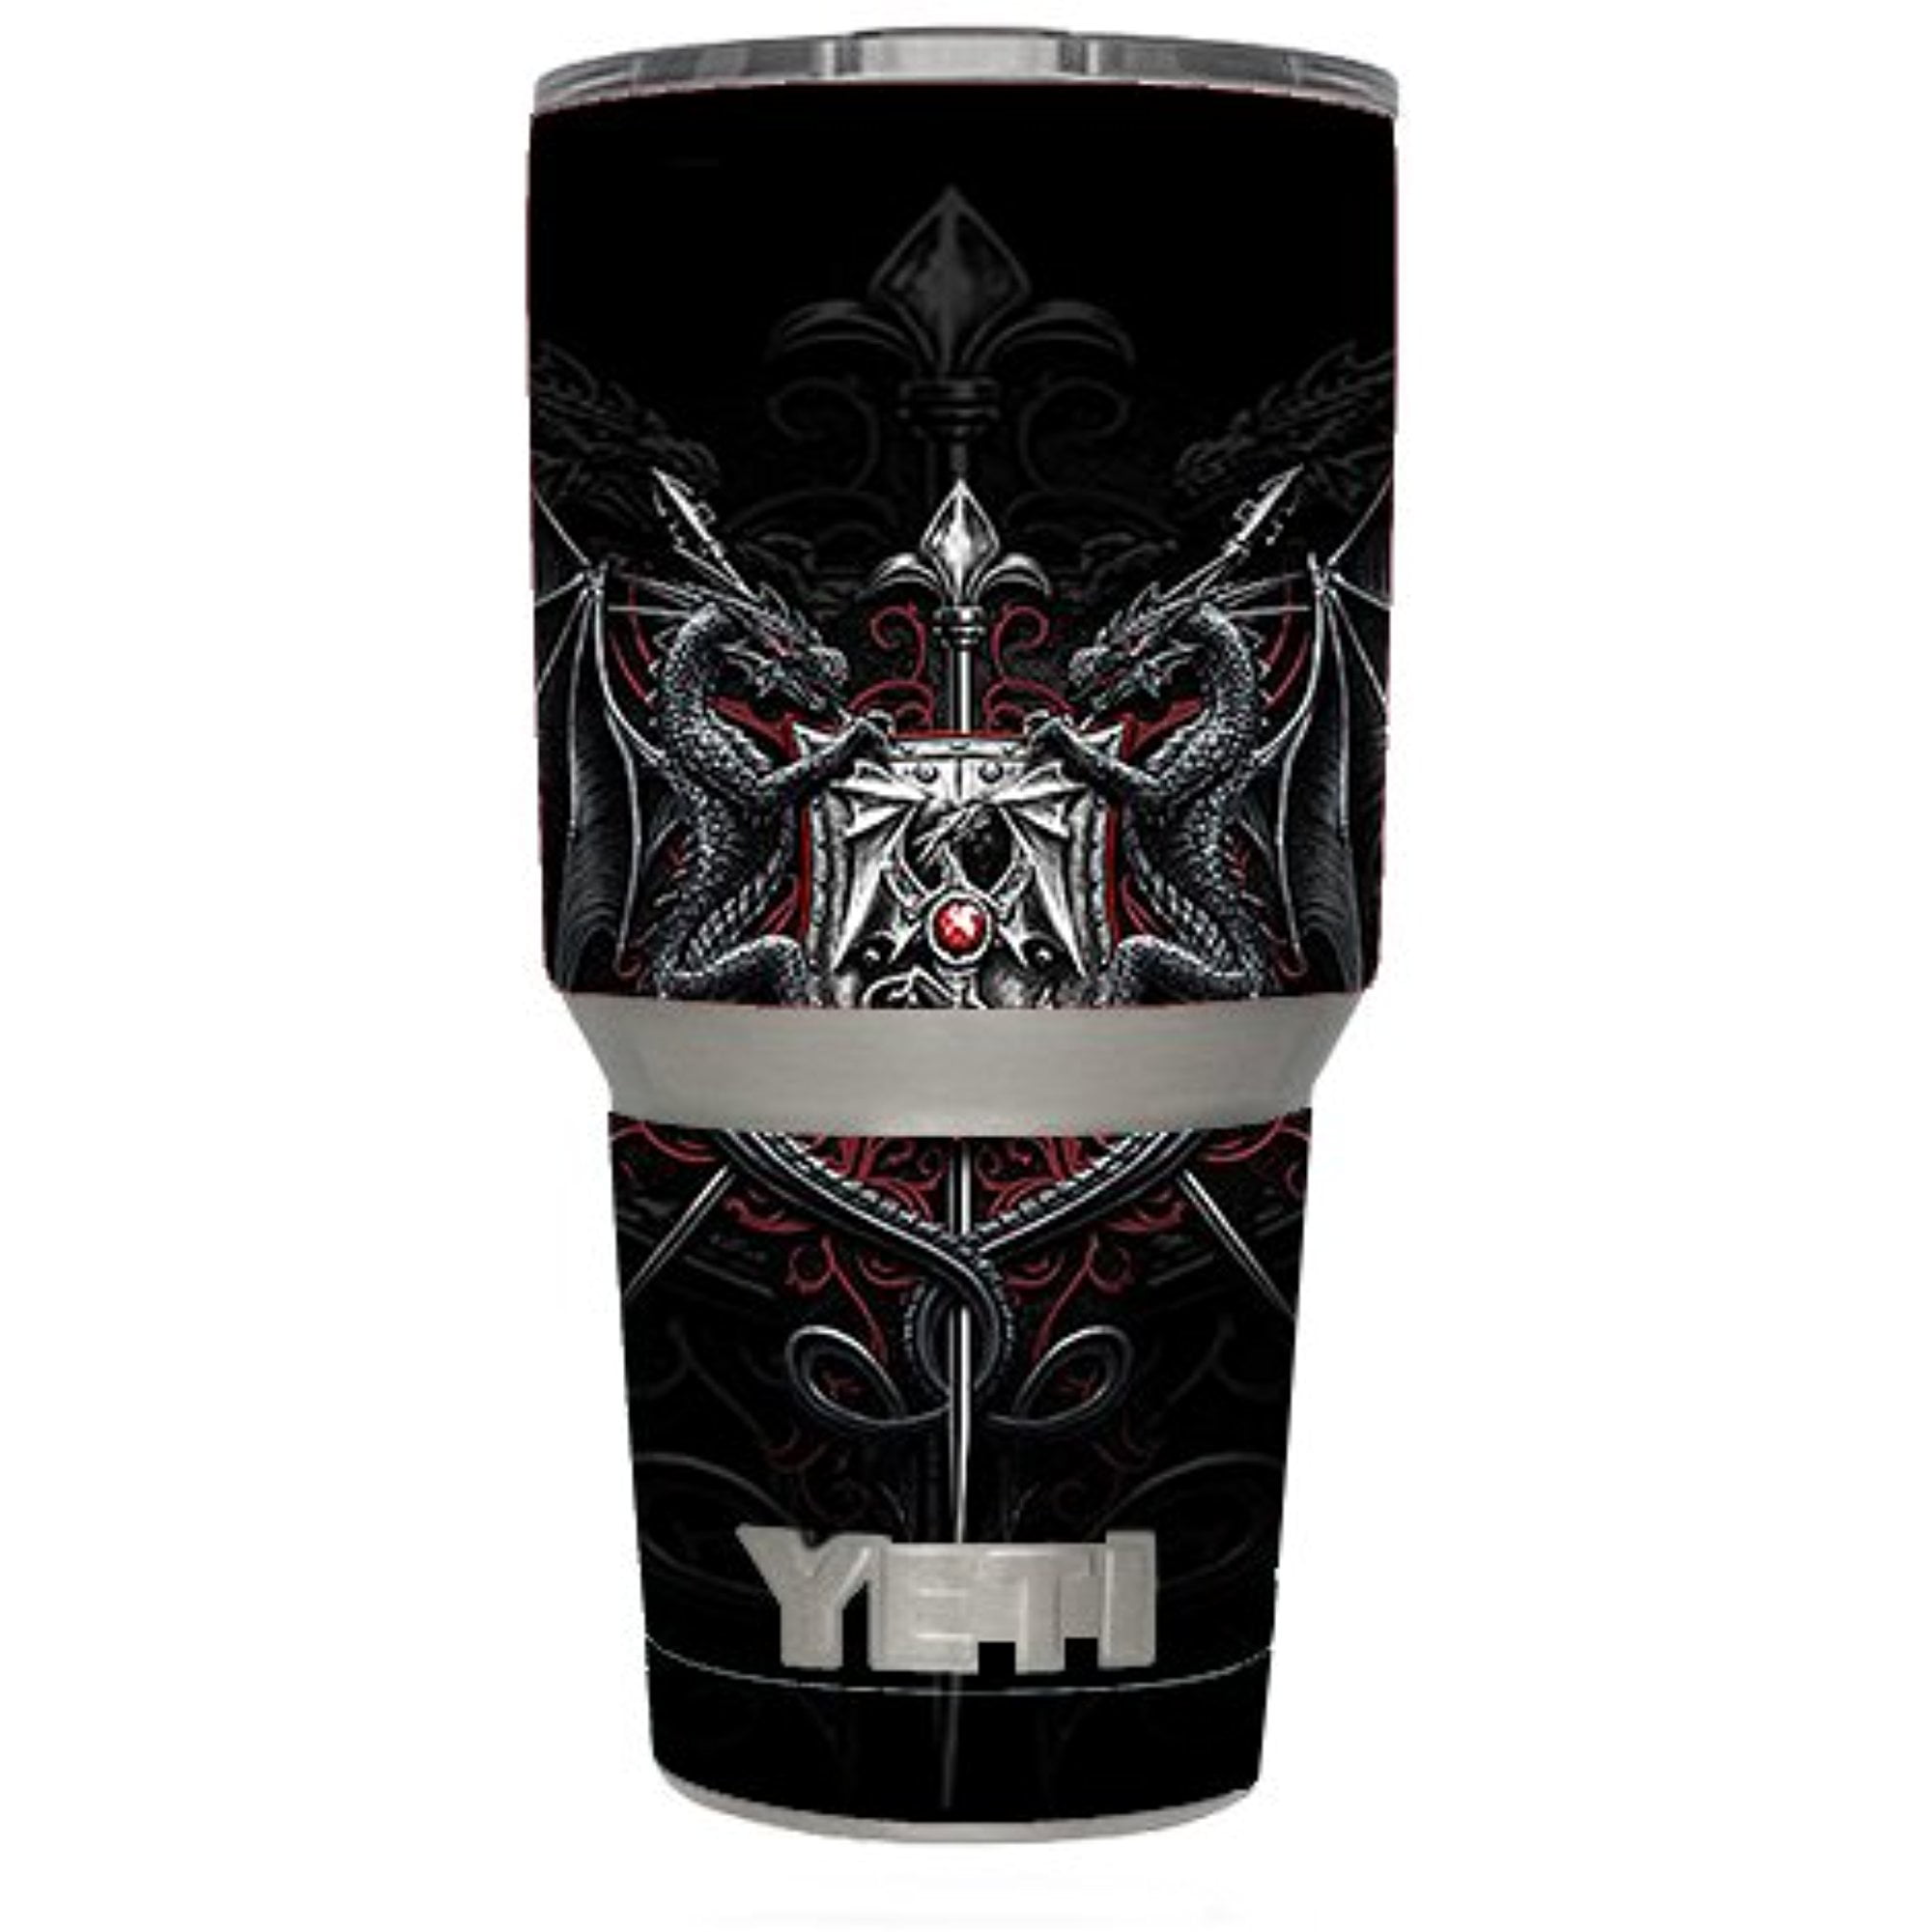 Yeti Decal for Women Tumbler Cup Decal for Women Yeti 